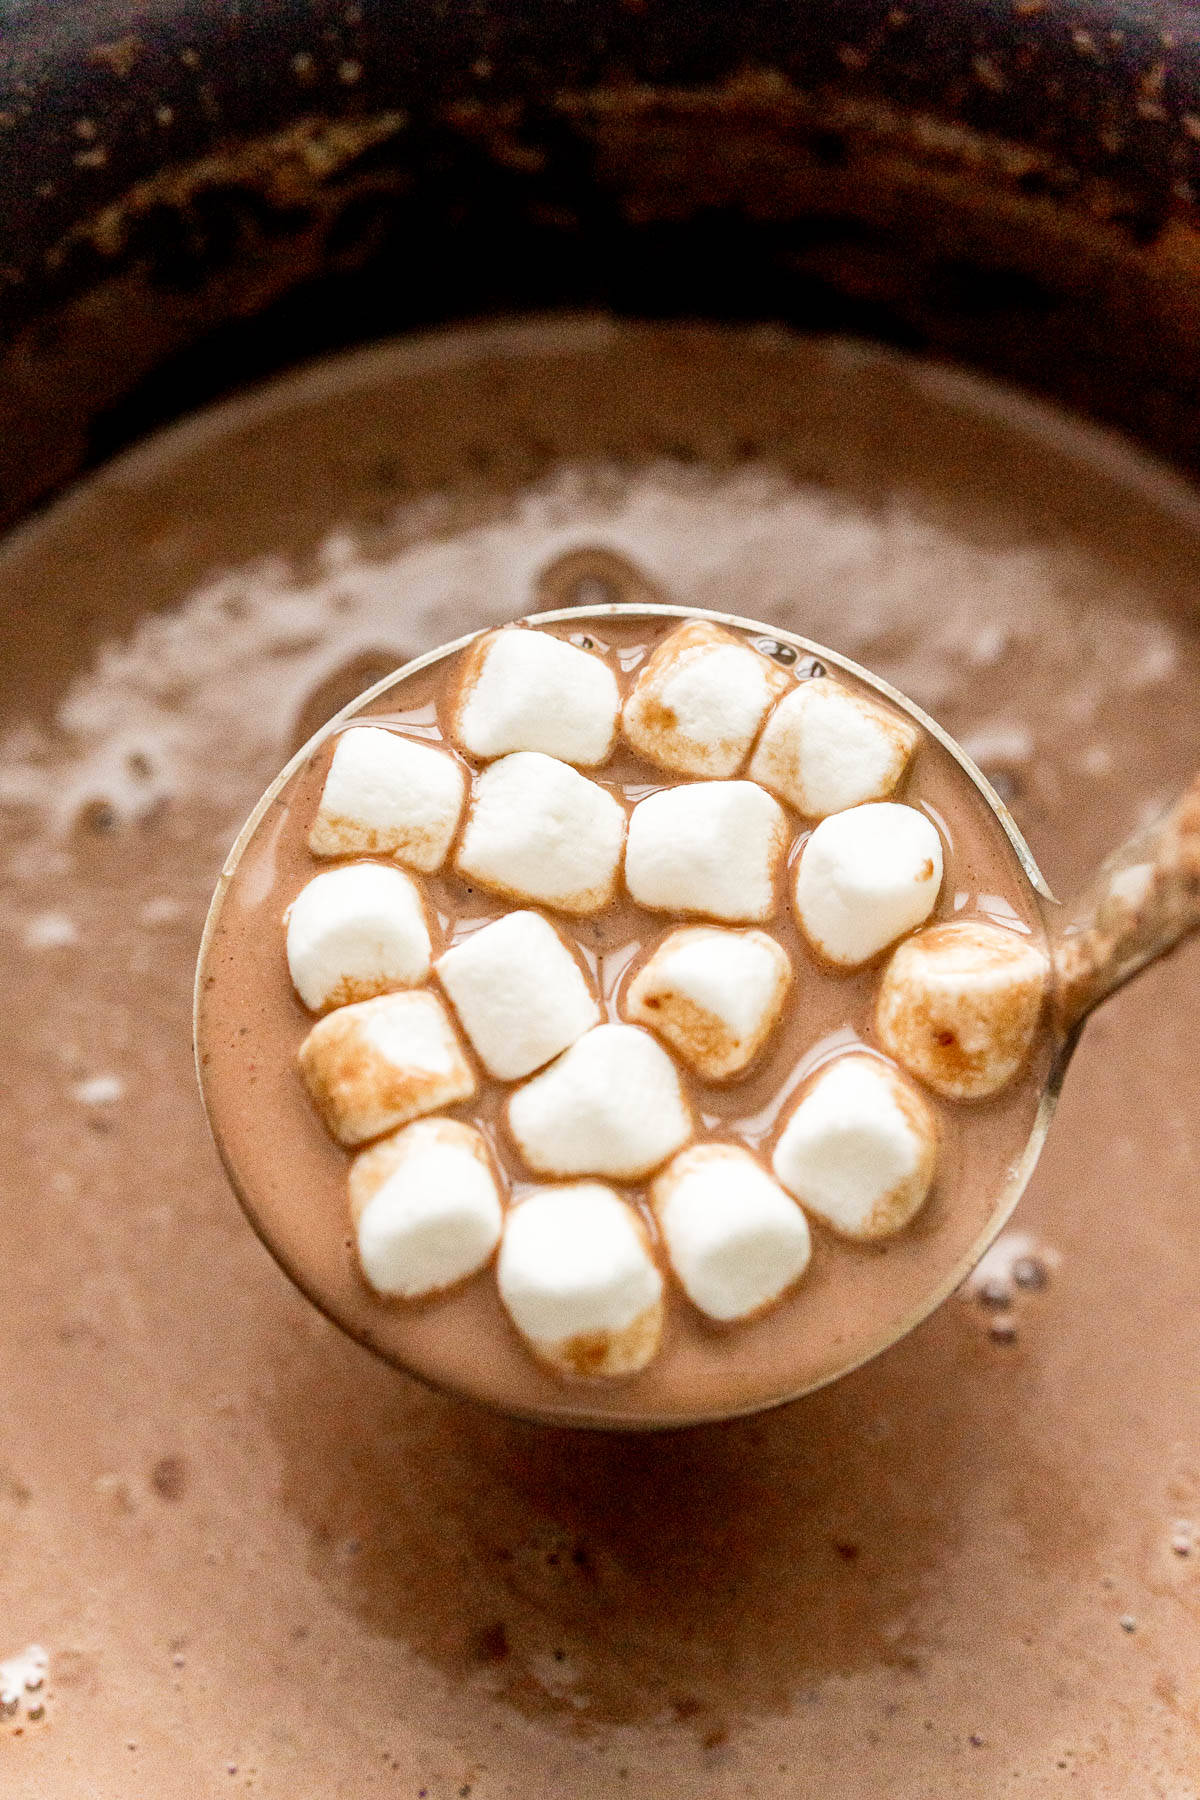 A ladle lifting hot chocolate and marshmallows out of a crockpot.